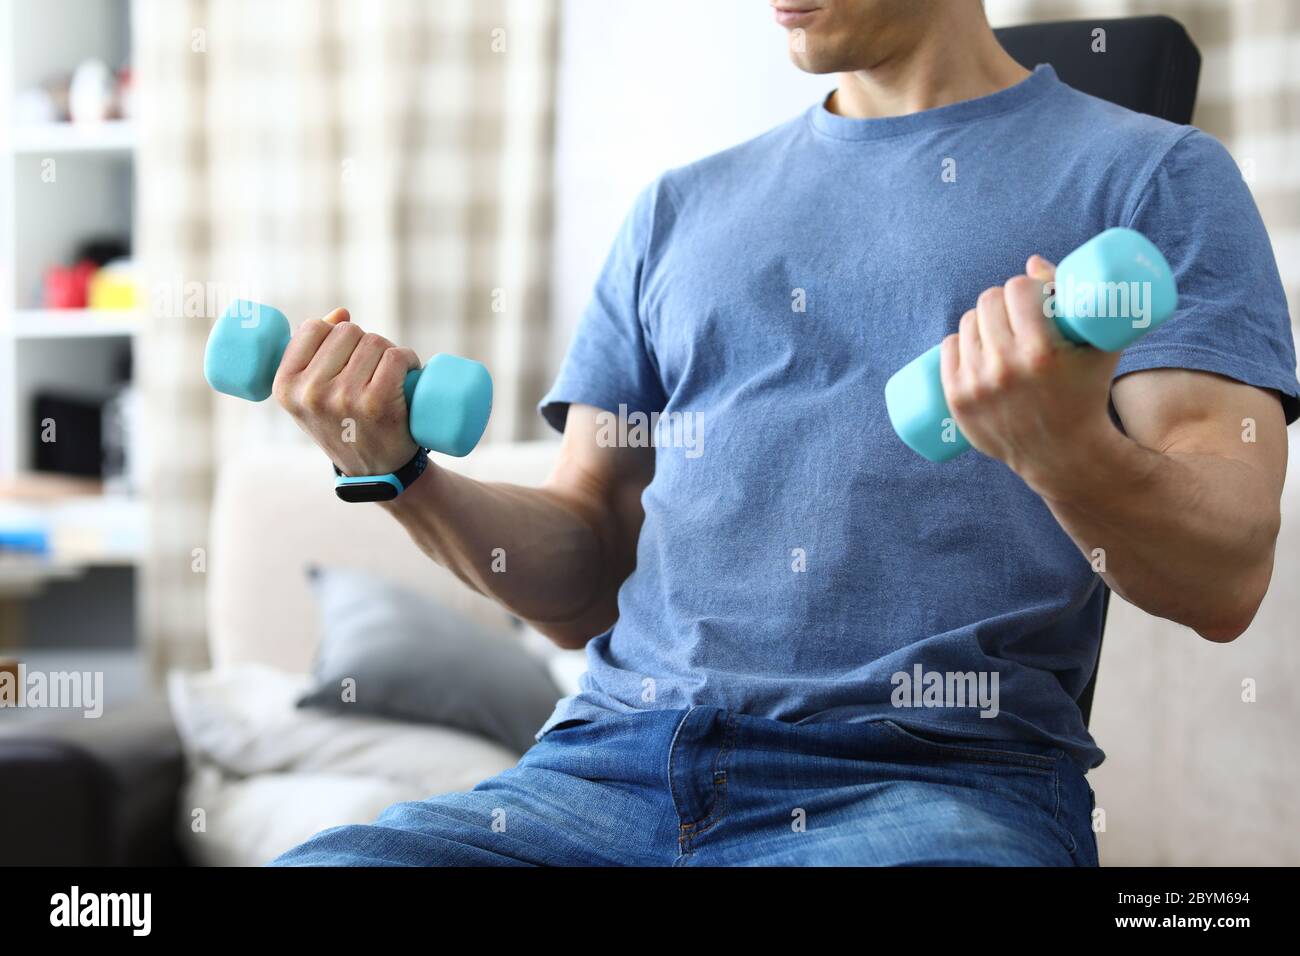 Professional athlete in blue shirt Stock Photo